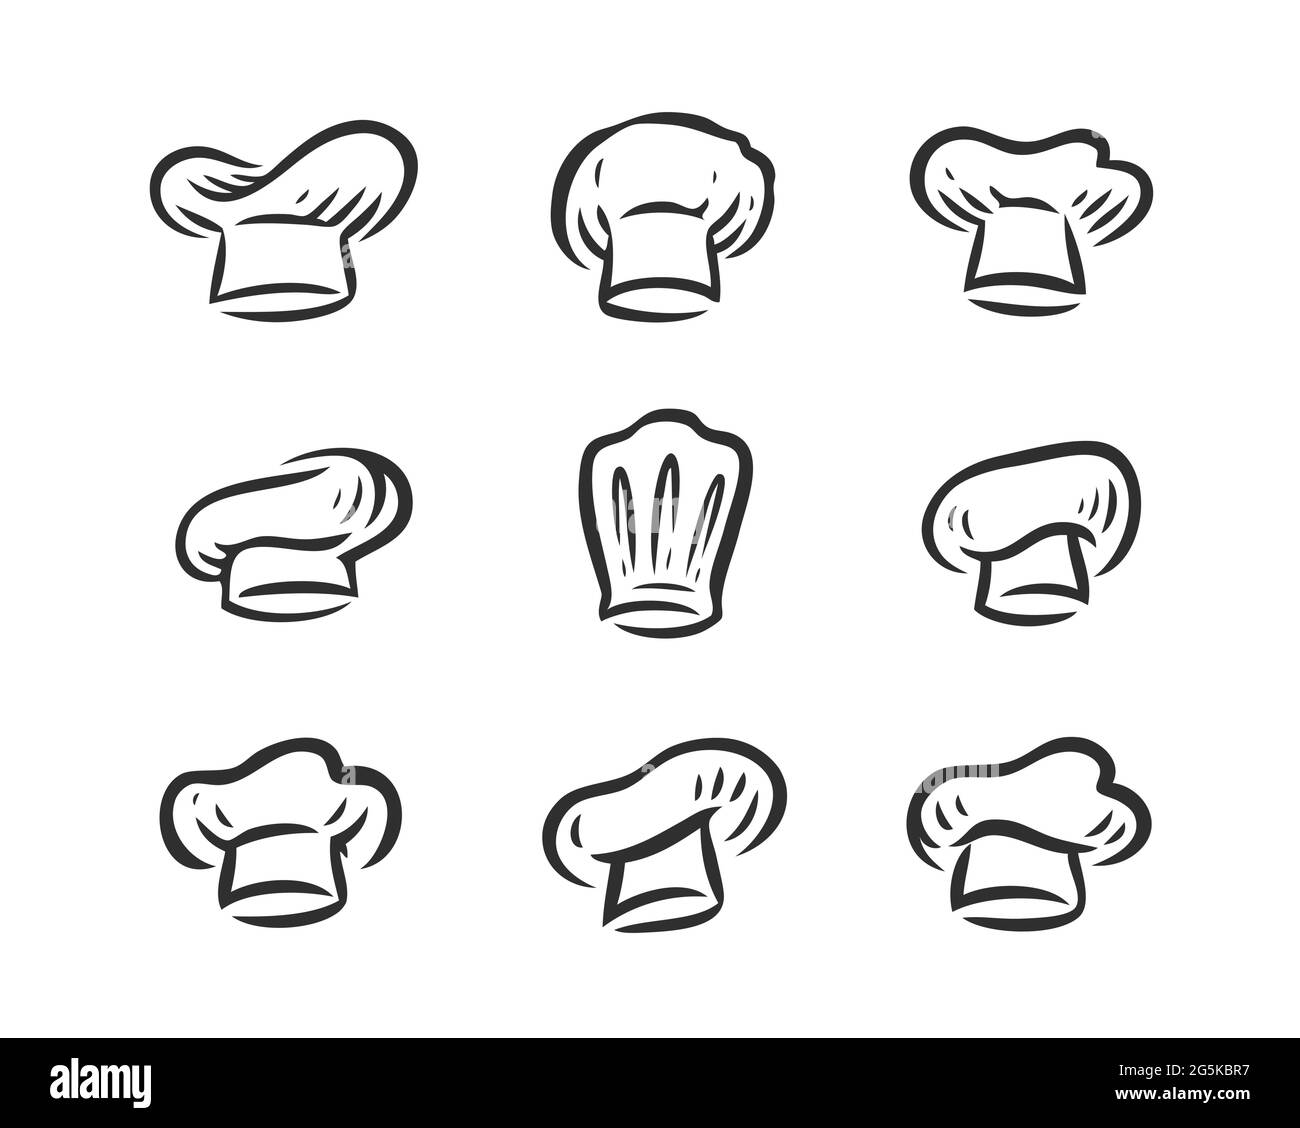 Chef hat icon. Cook, food concept. Cook symbol for restaurant or cafe menu decoration Stock Vector